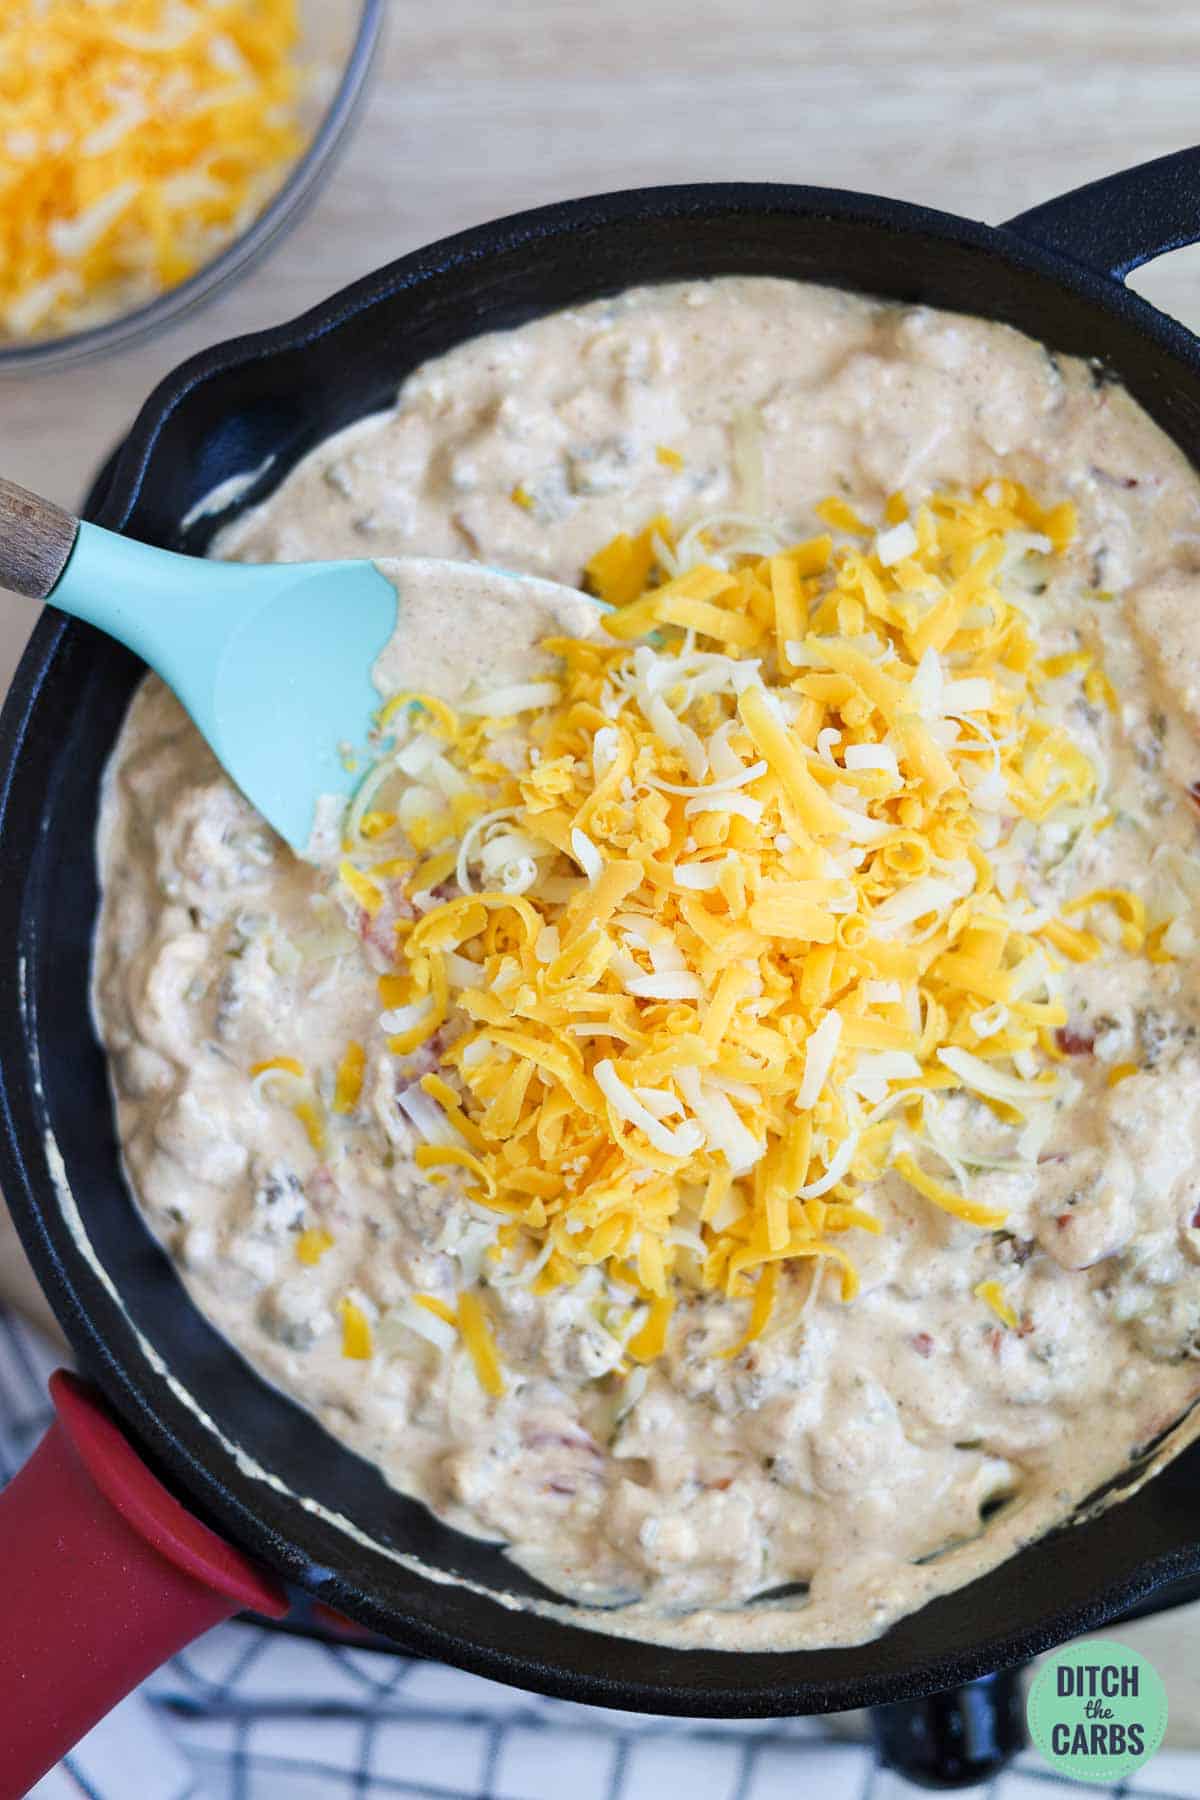 Mixing the shredded cheese into the keto queso dip a little at a time.